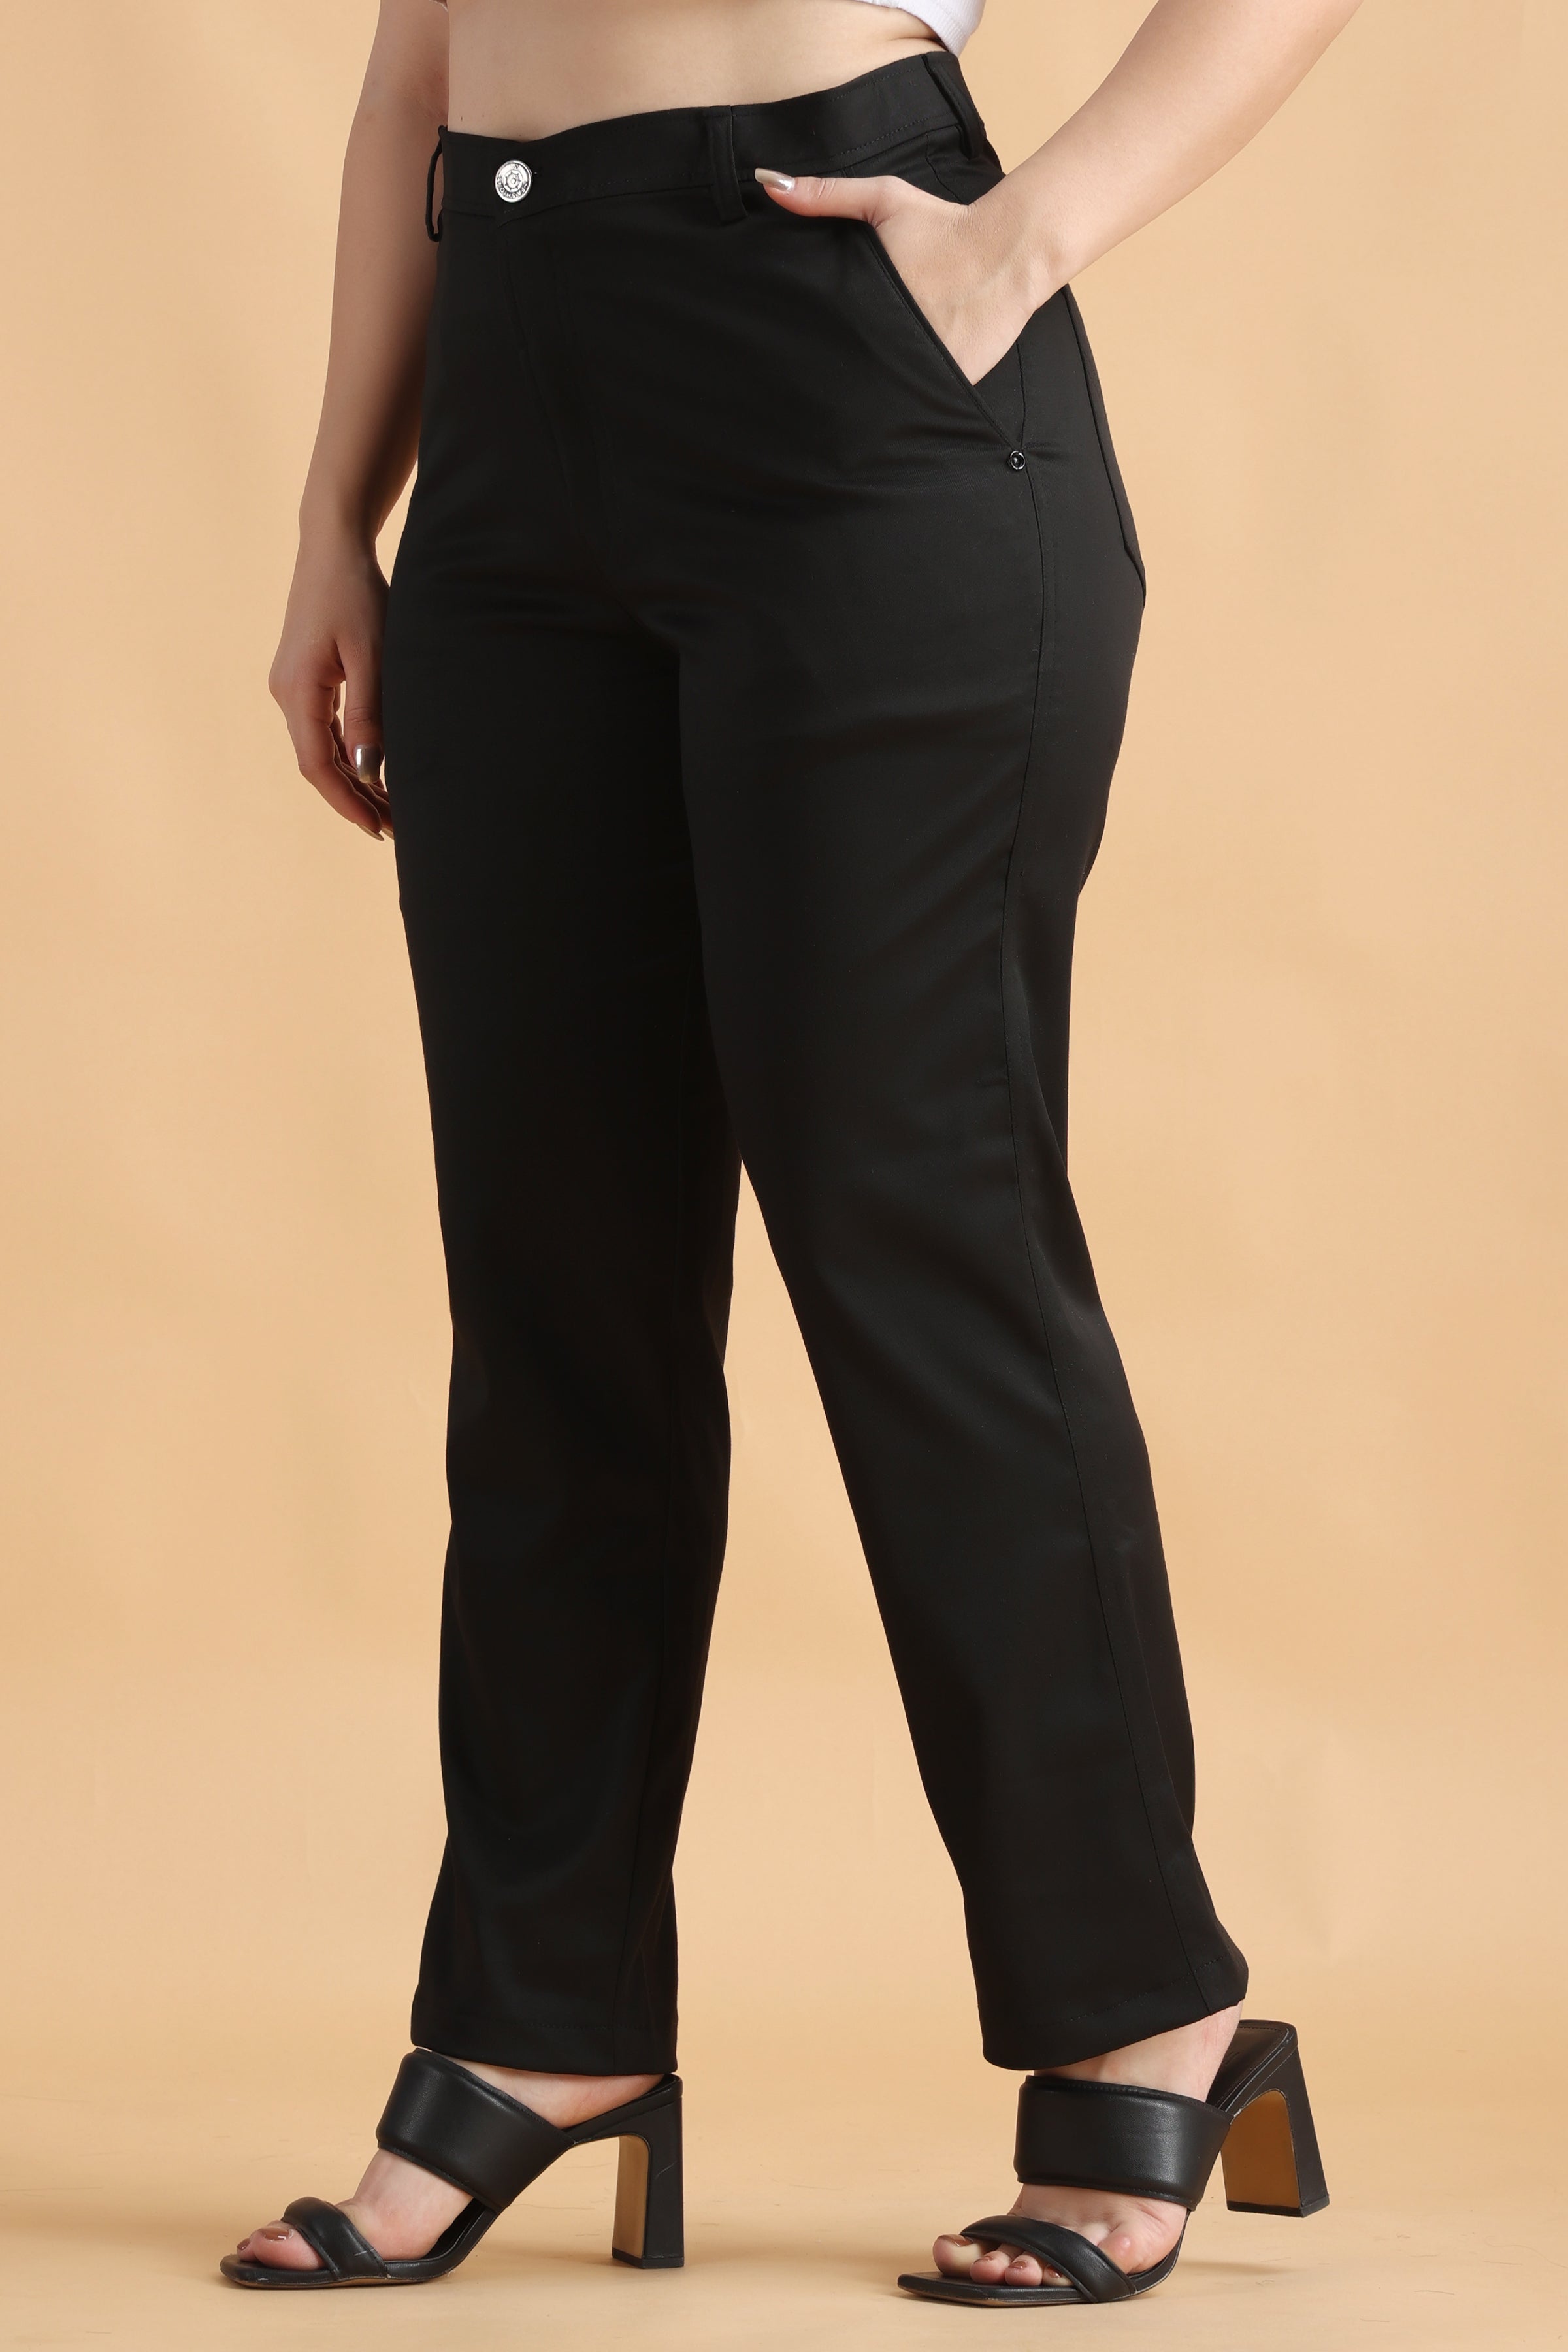 Buy Ankle Length Straight Fit Trouser Pants for Women/Girls (S, Black) at  Amazon.in